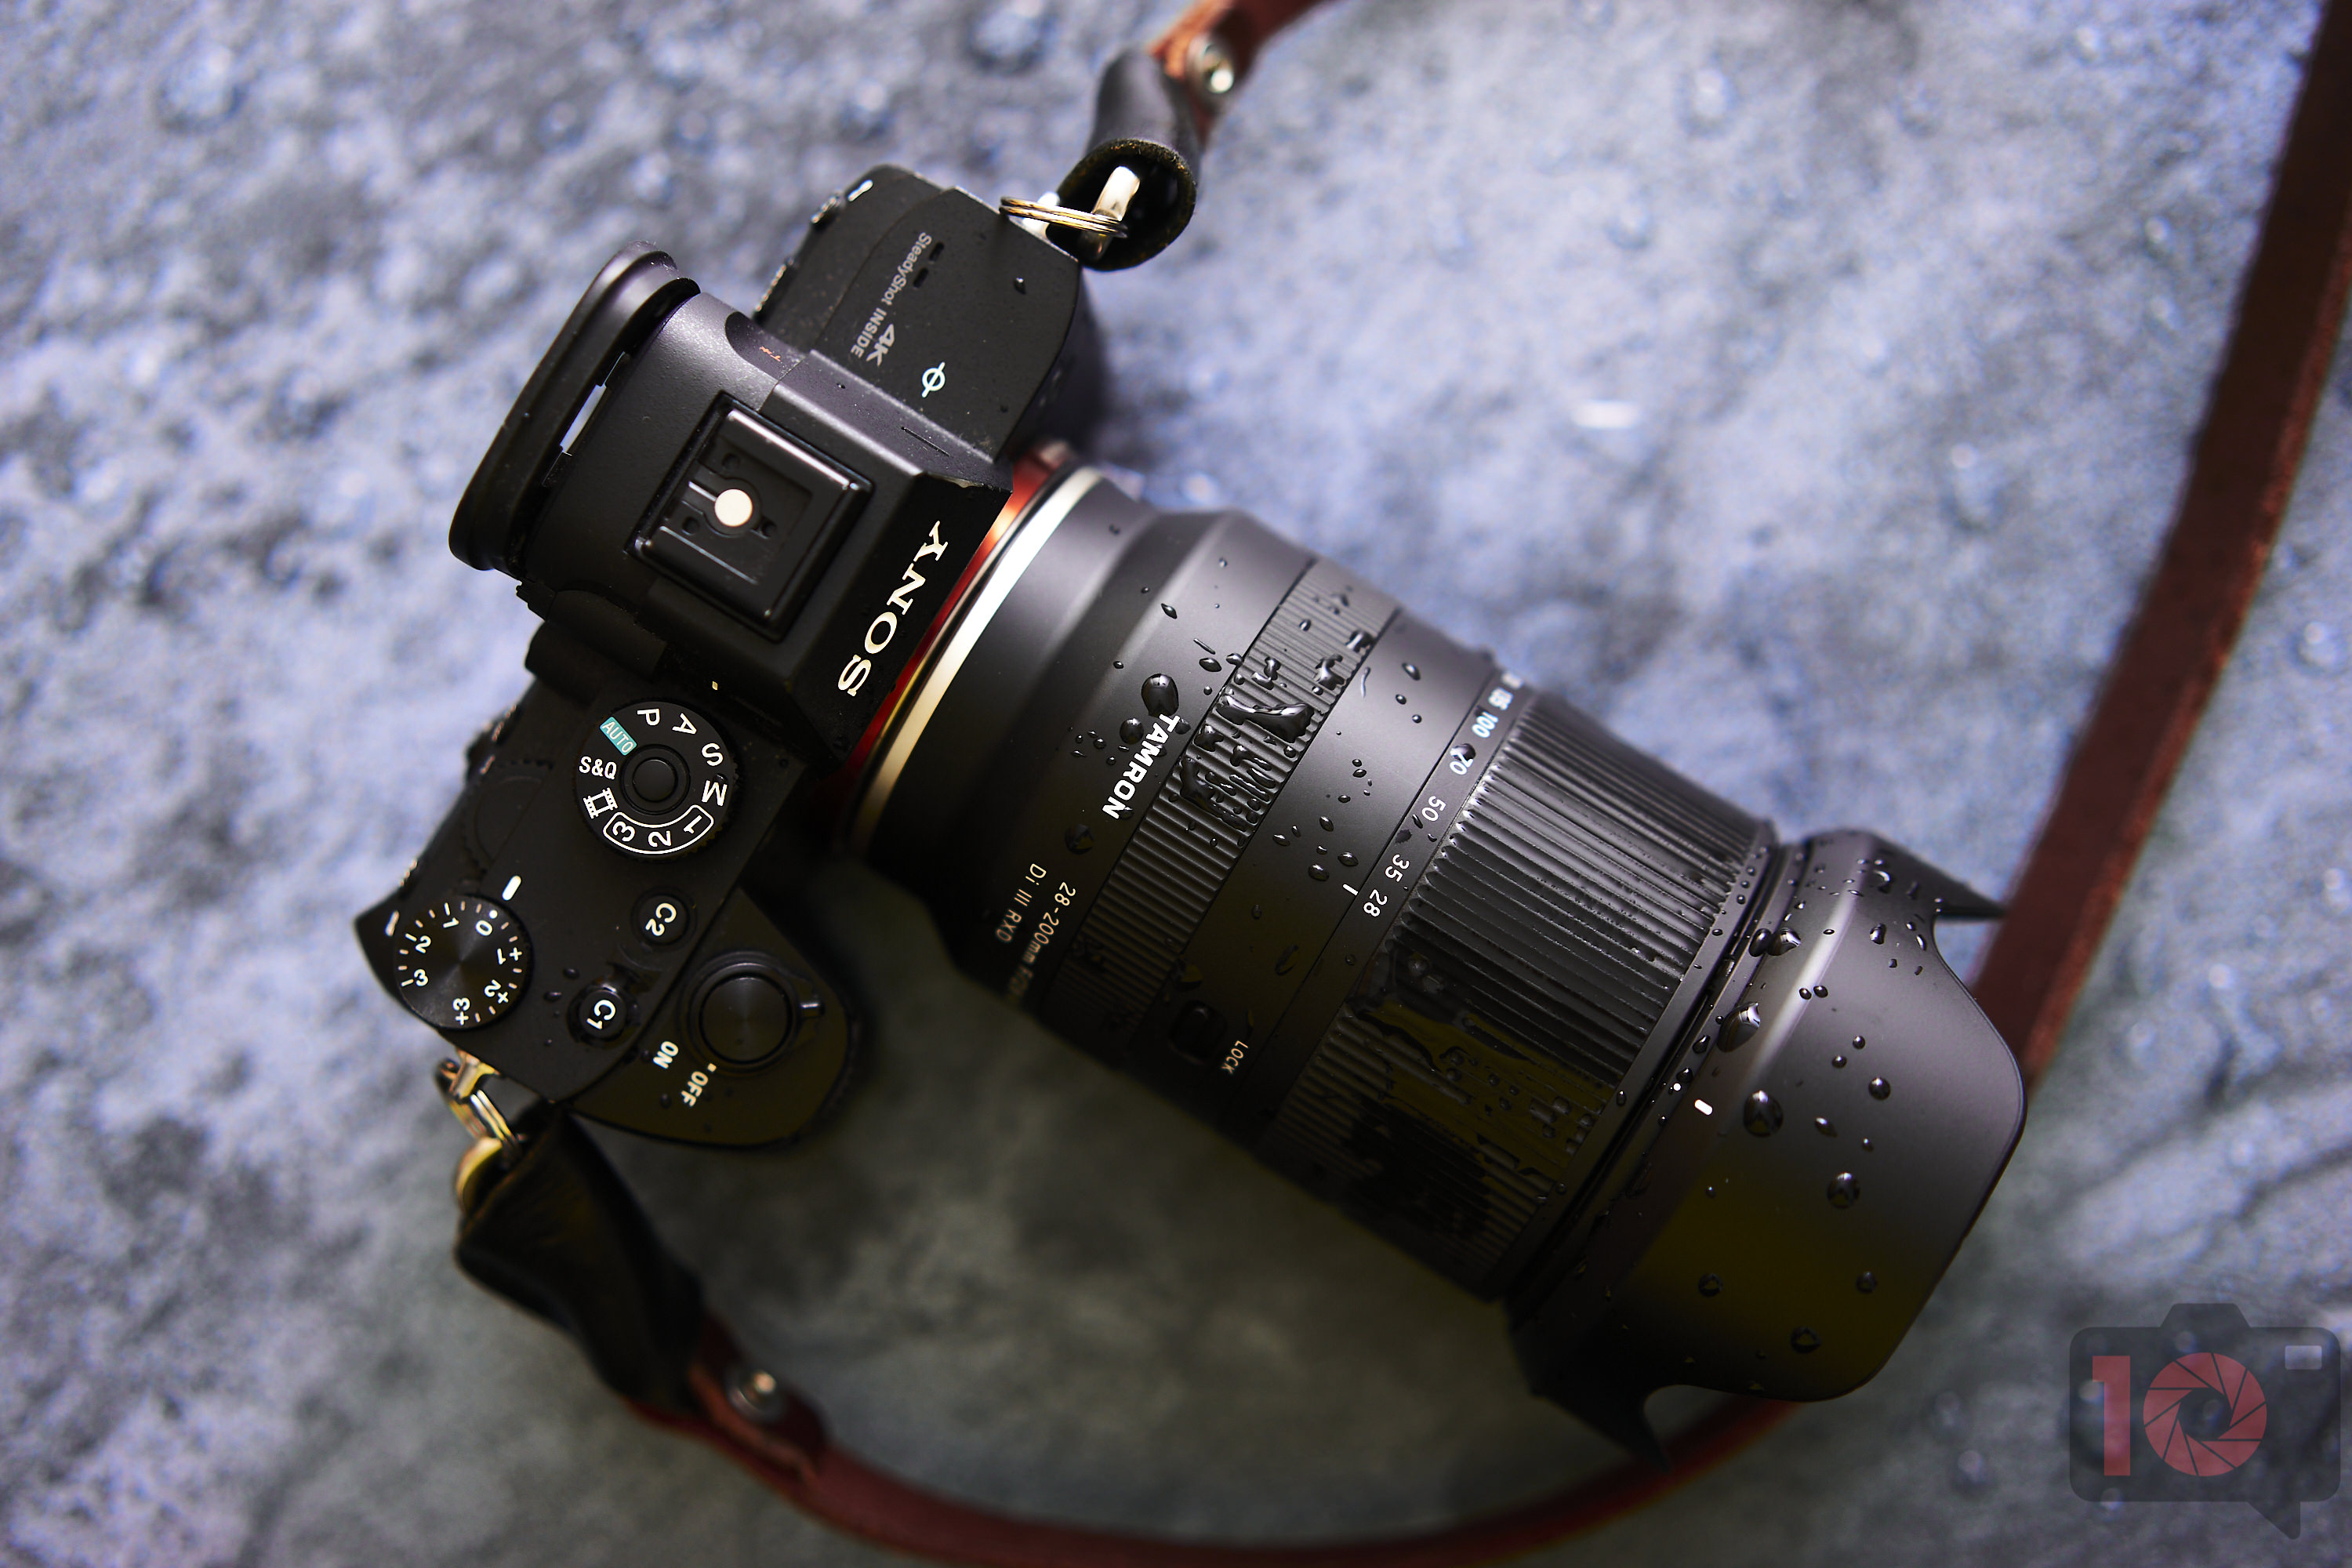 Sony Users Have Two More Great Tamron Lenses To Look Forward To